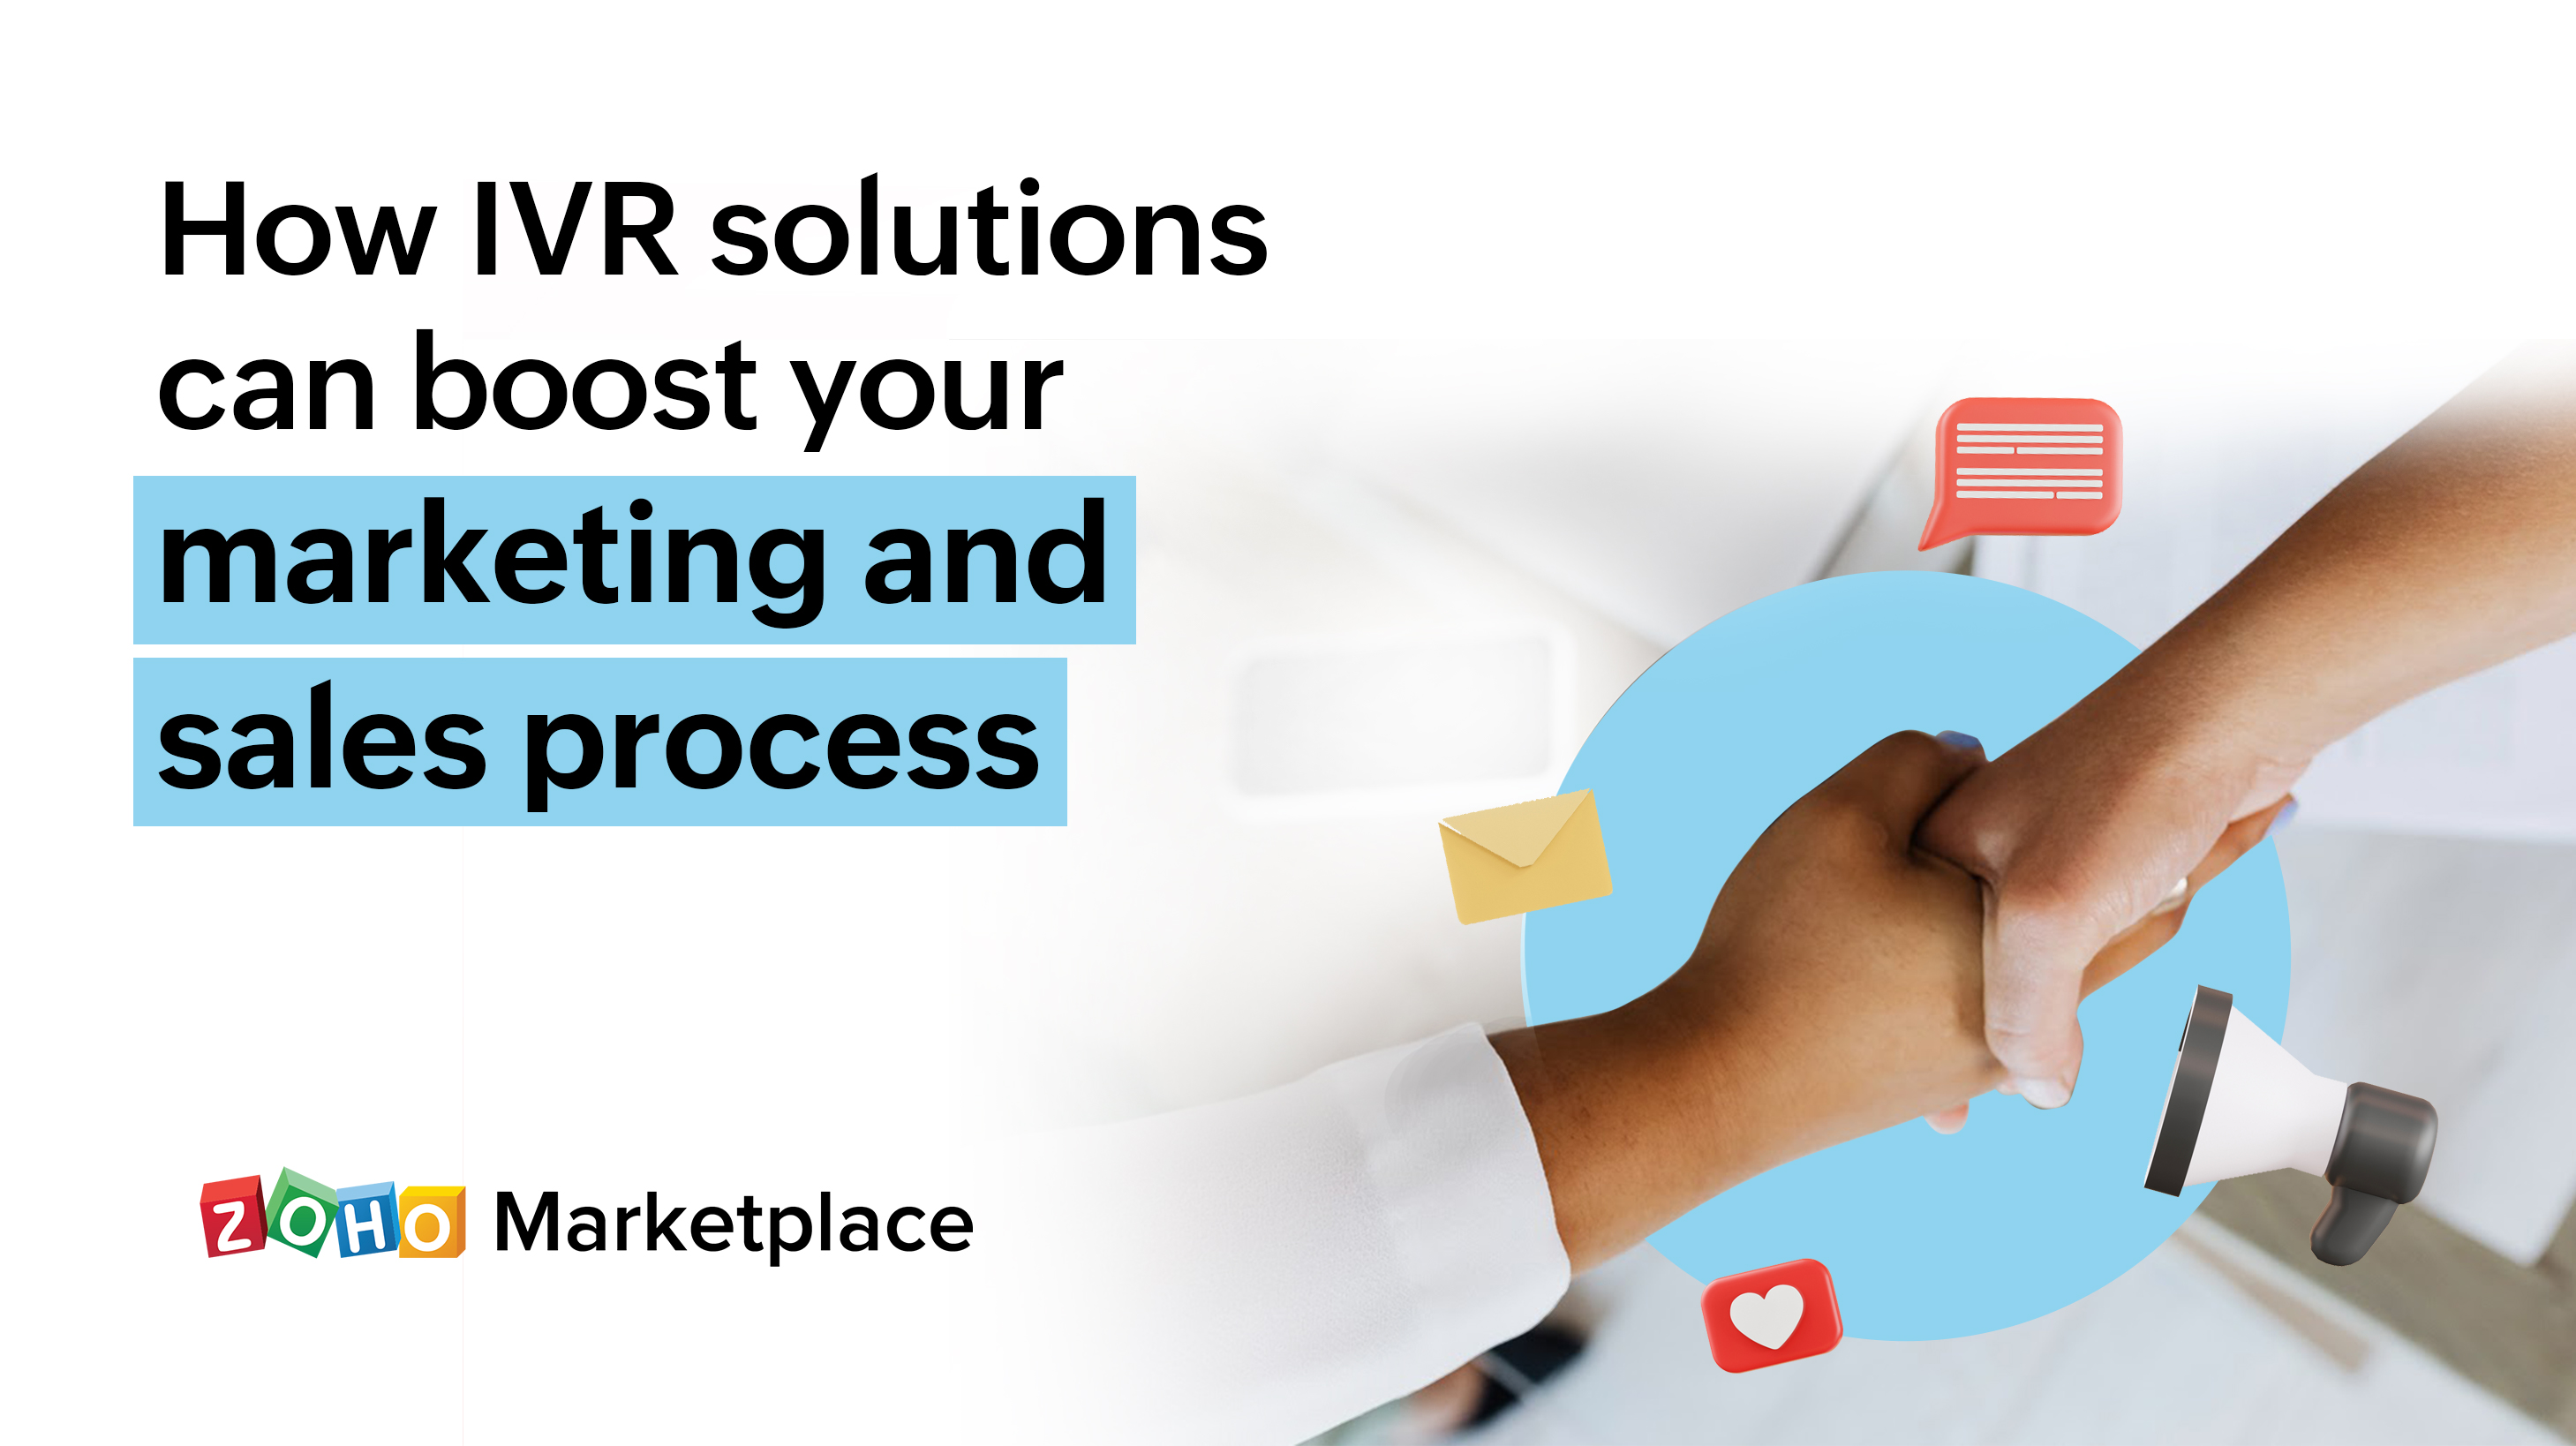 How IVR solutions can boost your marketing and sales process